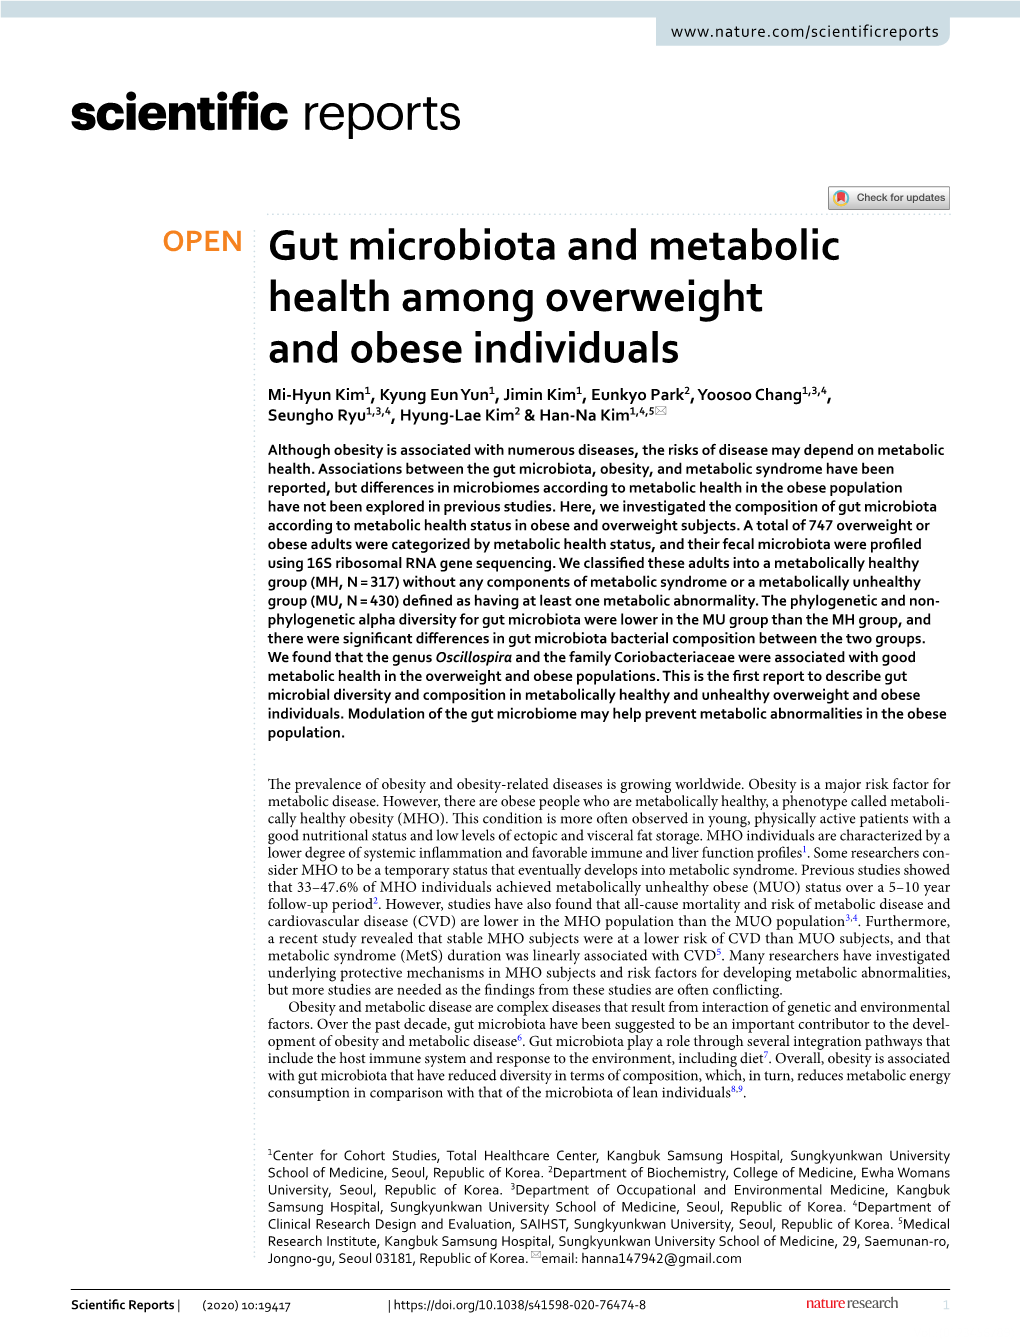 Gut Microbiota and Metabolic Health Among Overweight and Obese